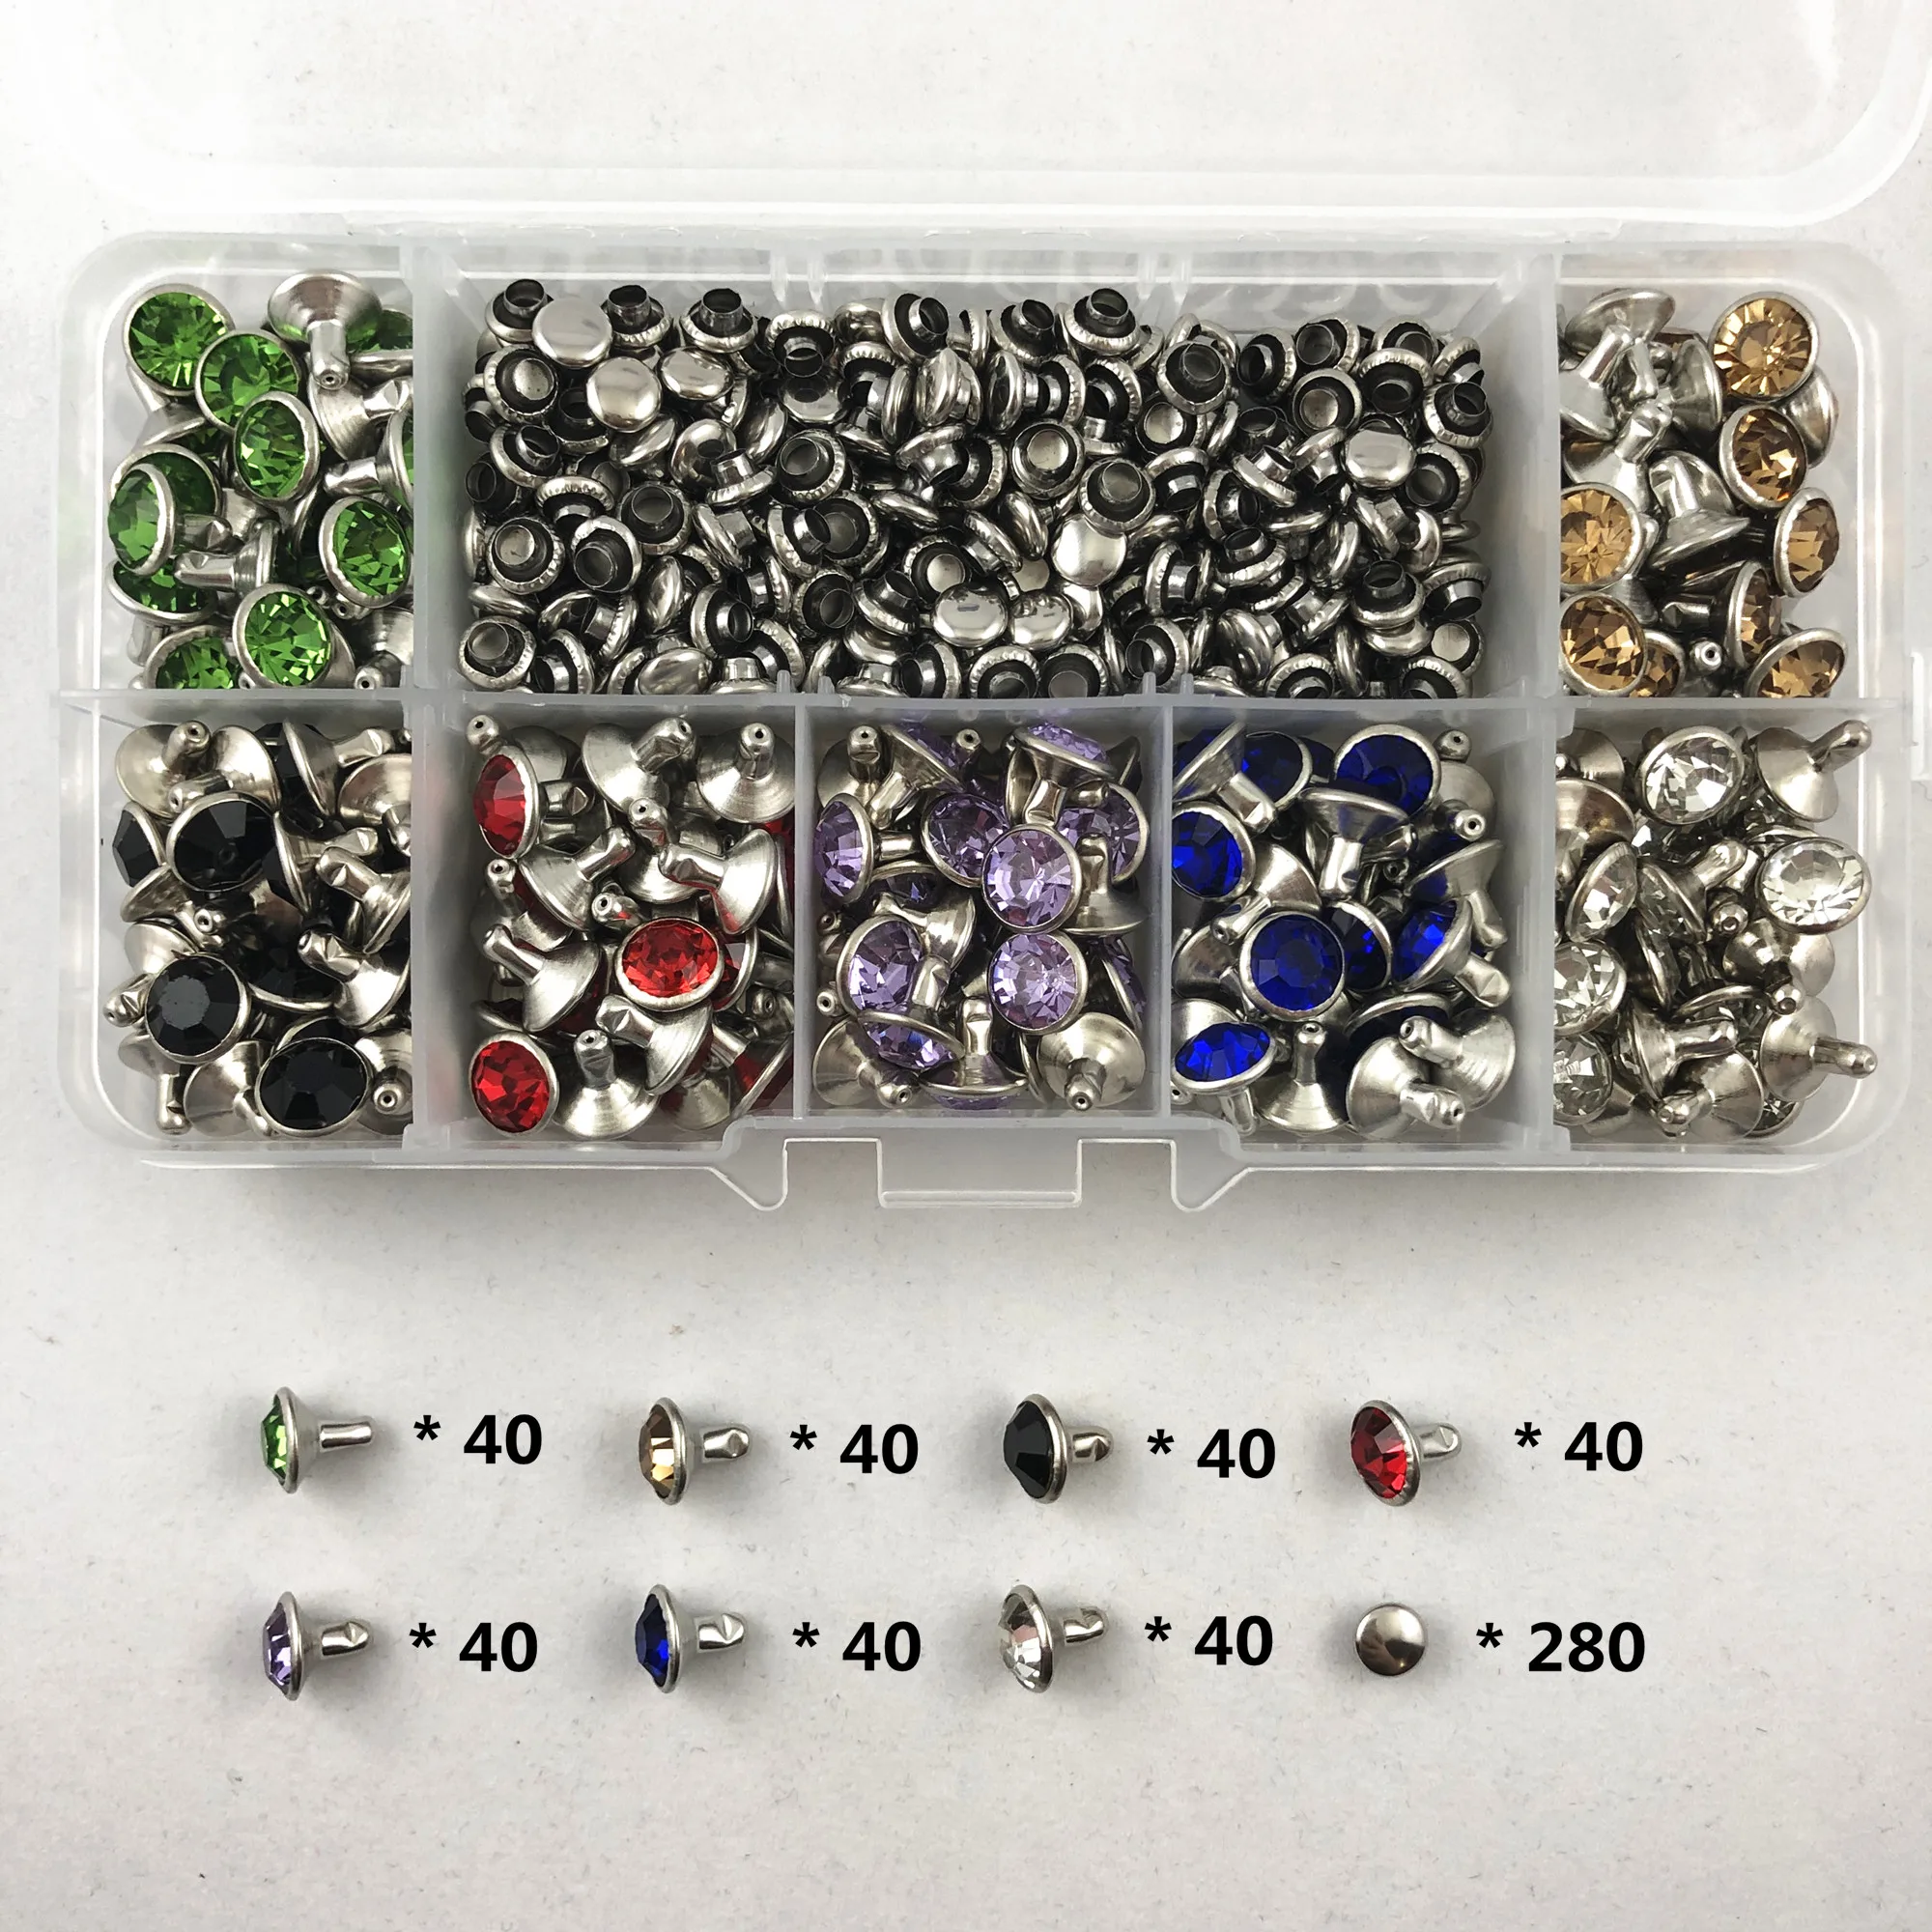 

YORANYO 280 Sets 8MM CZ+++ Crystal Rivets Silver Plated Mixed Color Spots Studs Double Cap for DIY Leather-Craft Making